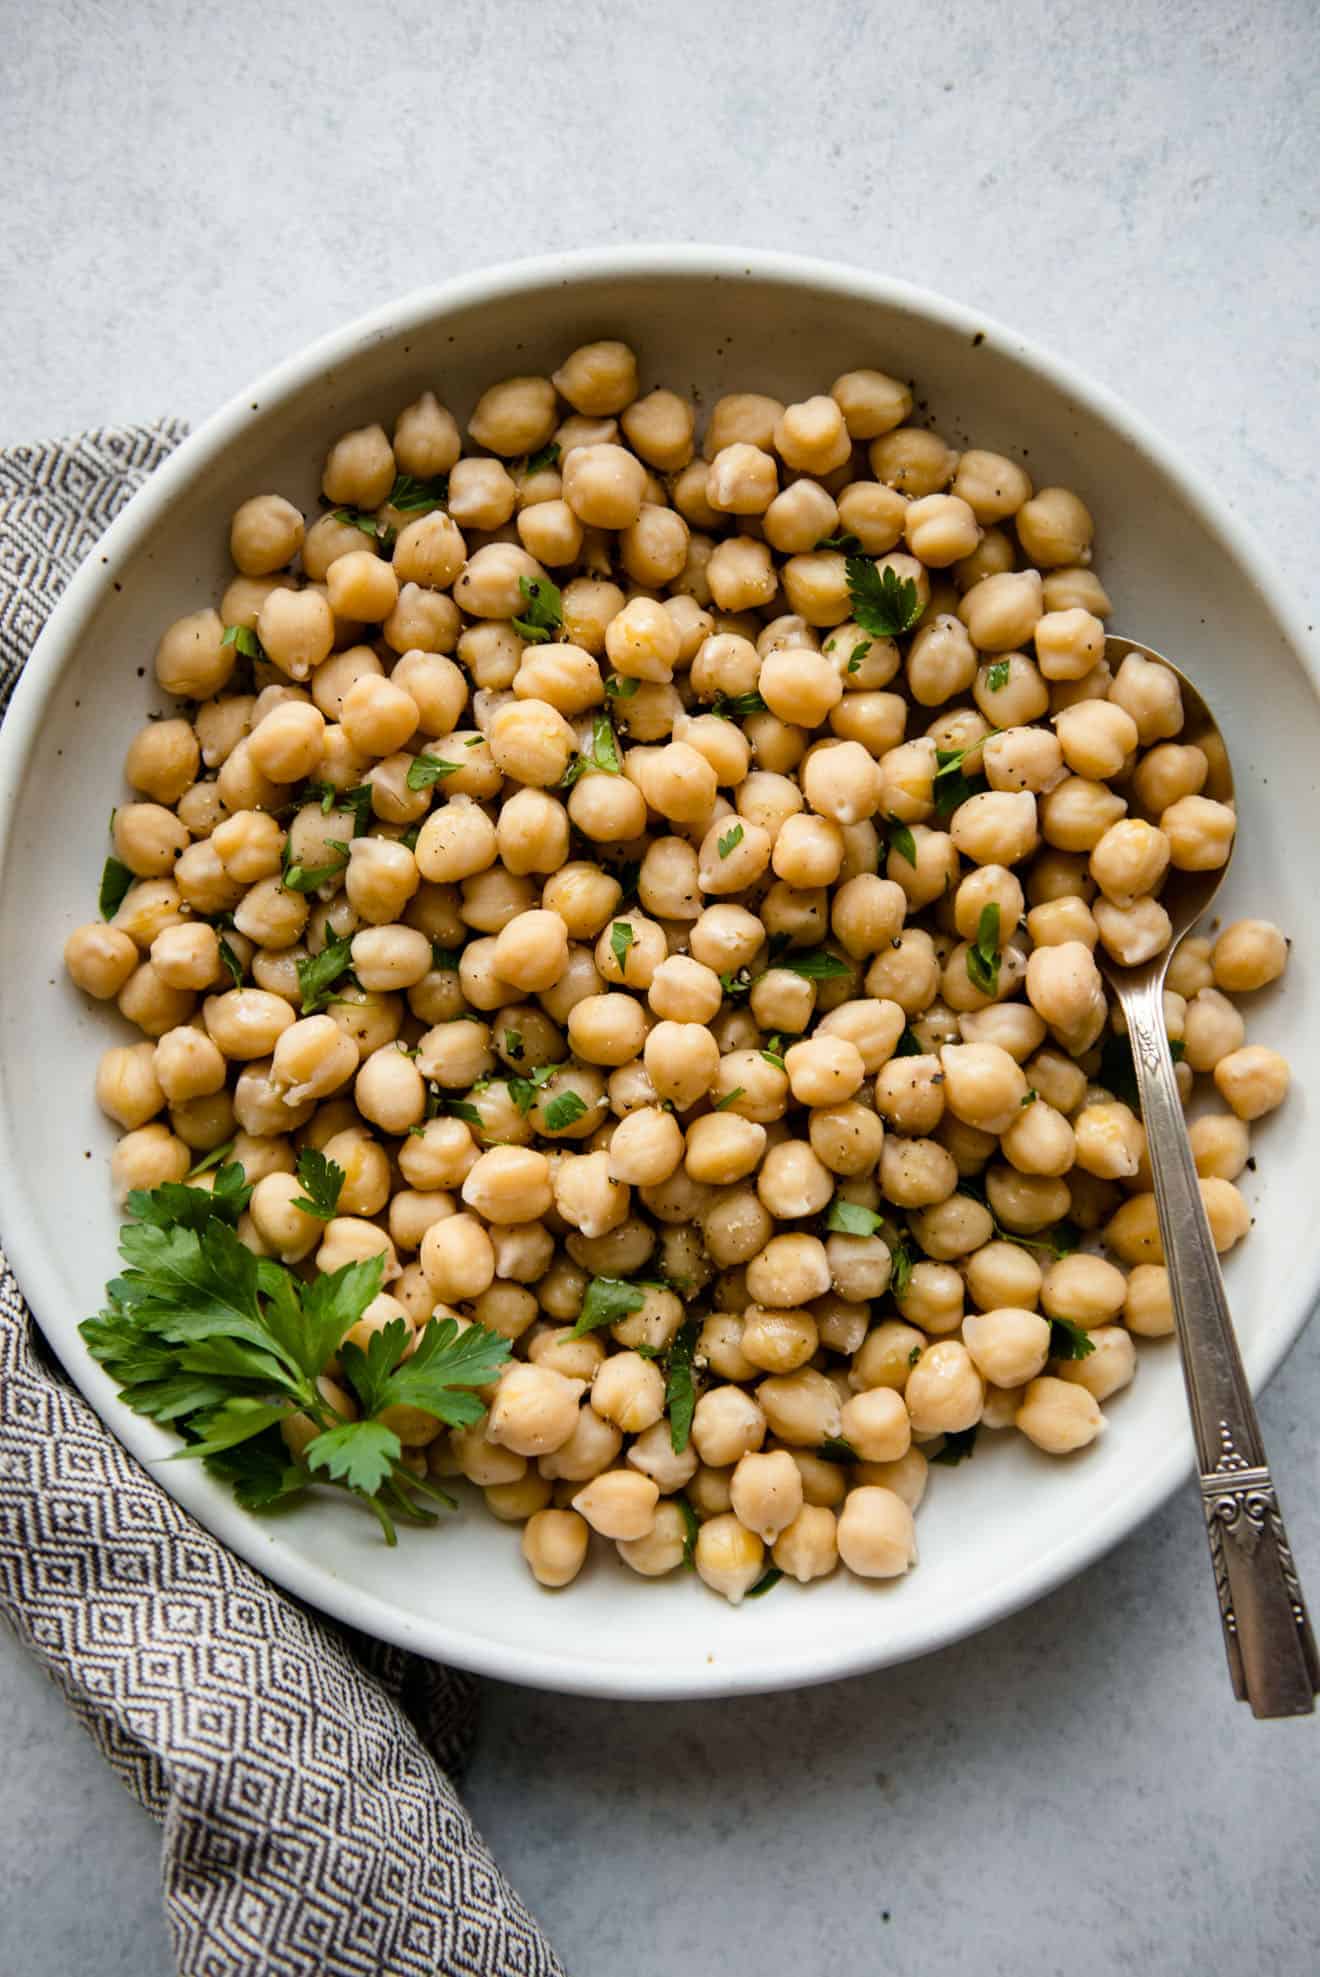 How to Cook Chickpeas 3 Ways: Stovetop, Slow Cooker & Instant Pot